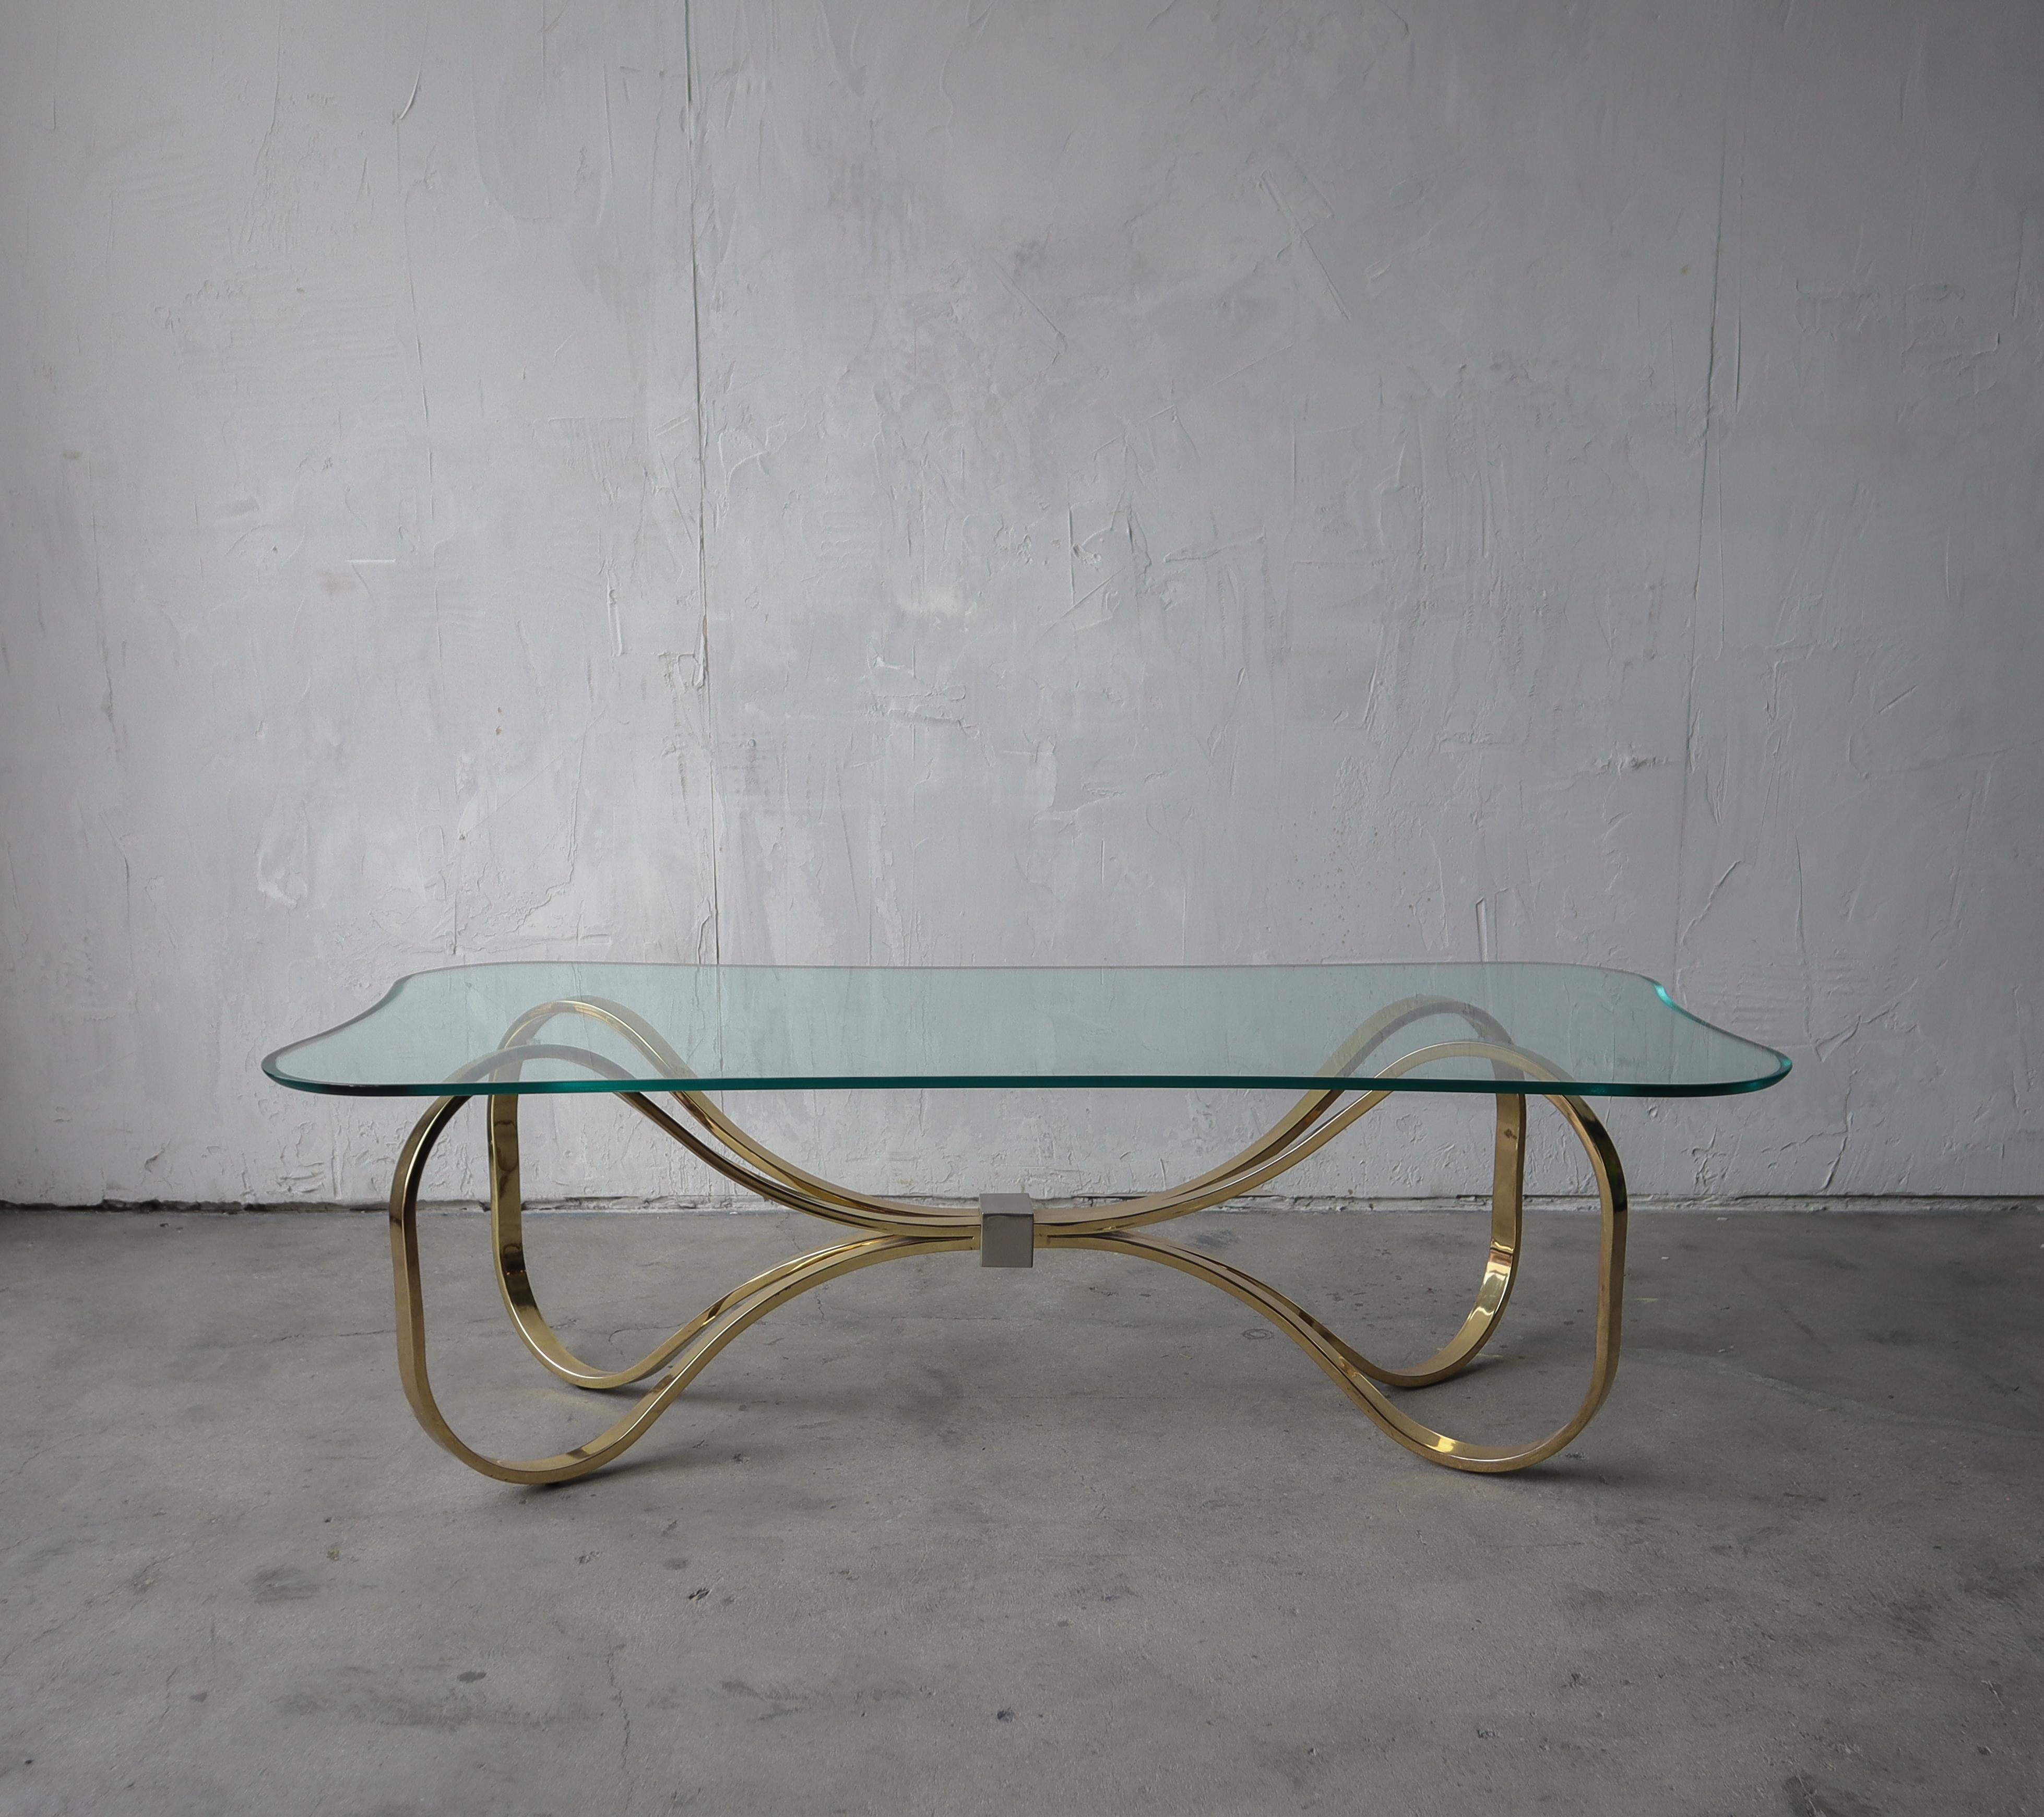 Nice 1980s brass and glass coffee table, shaped like a bow tie. Visually a beautiful table. The curvy design and glass give it a very feminine, classy appeal.

Table is in excellent condition overall, very minimal marks on the glass from use, but